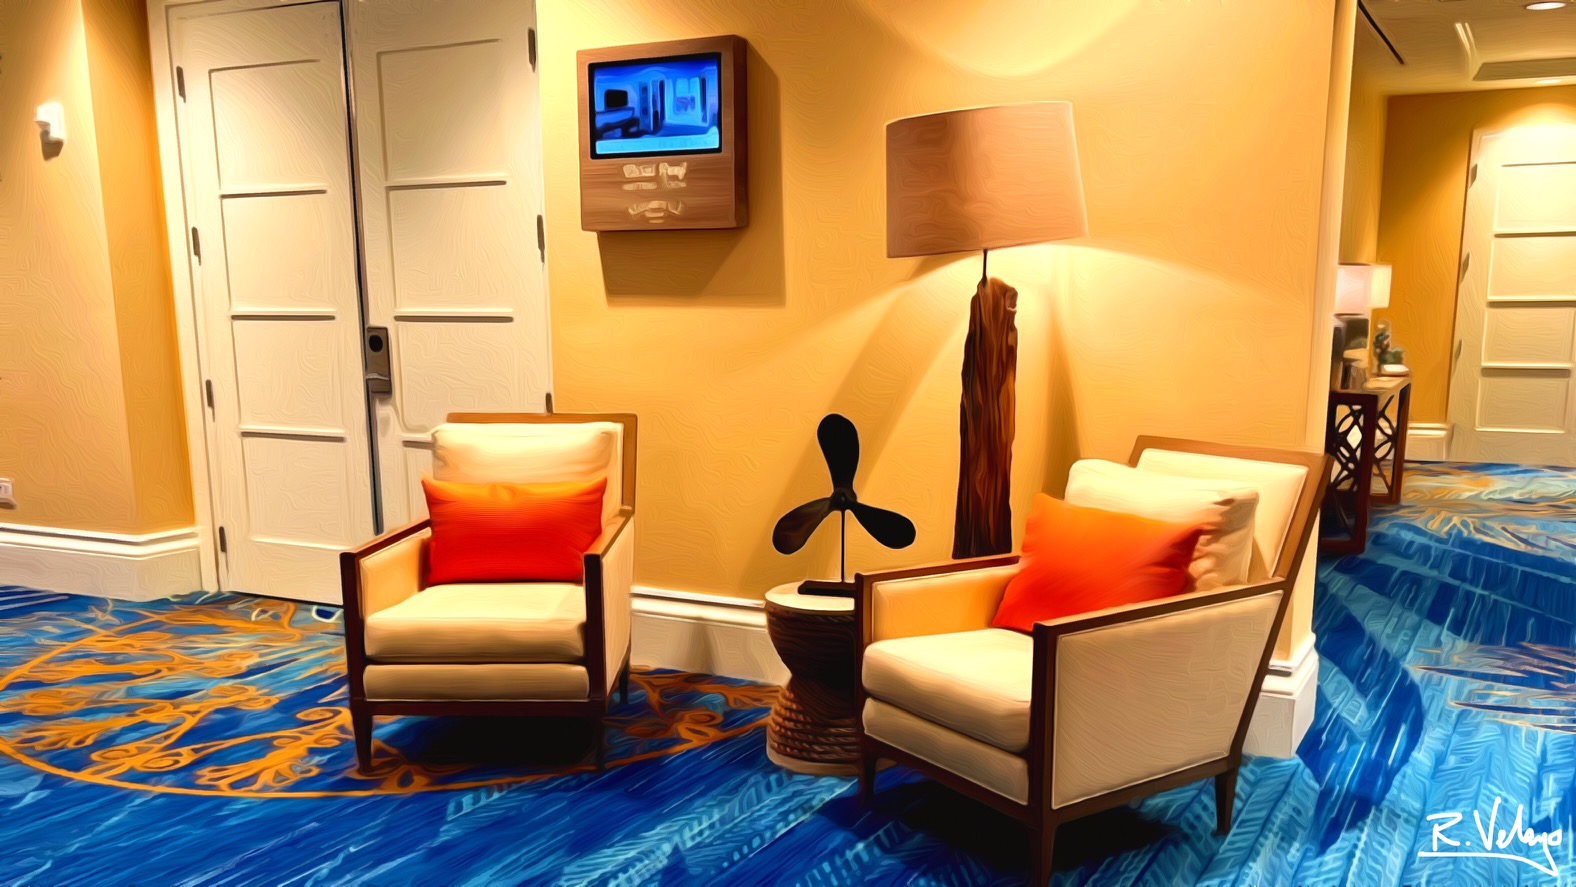 "LOUNGE AREA WITH TWO BRIGHT ORANGE PILLOWS" [Created: 1/06/2022]